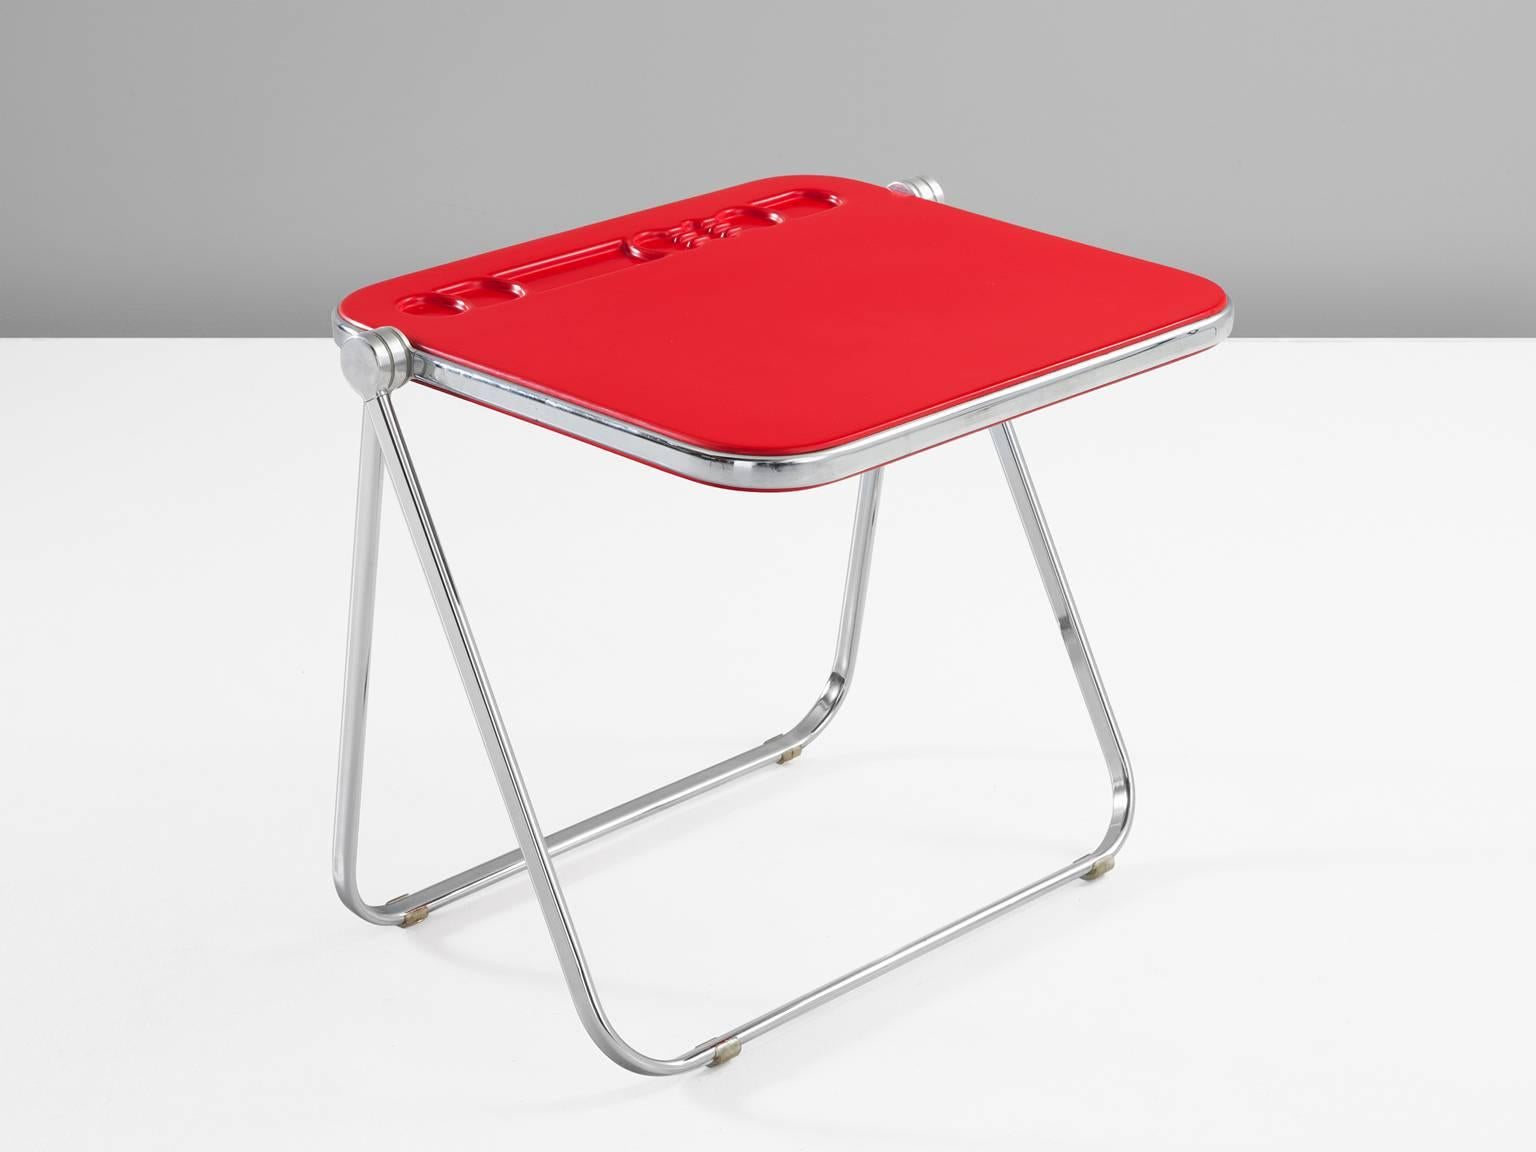 Folding desk, Red ABS plastic and chromed steel, 1970s, Italy. 

This playful item is designed by Giancarlo Piretti for Castelli. The vibrant red top is a perfect match with the bold design of this little table. The desk could function perfectly